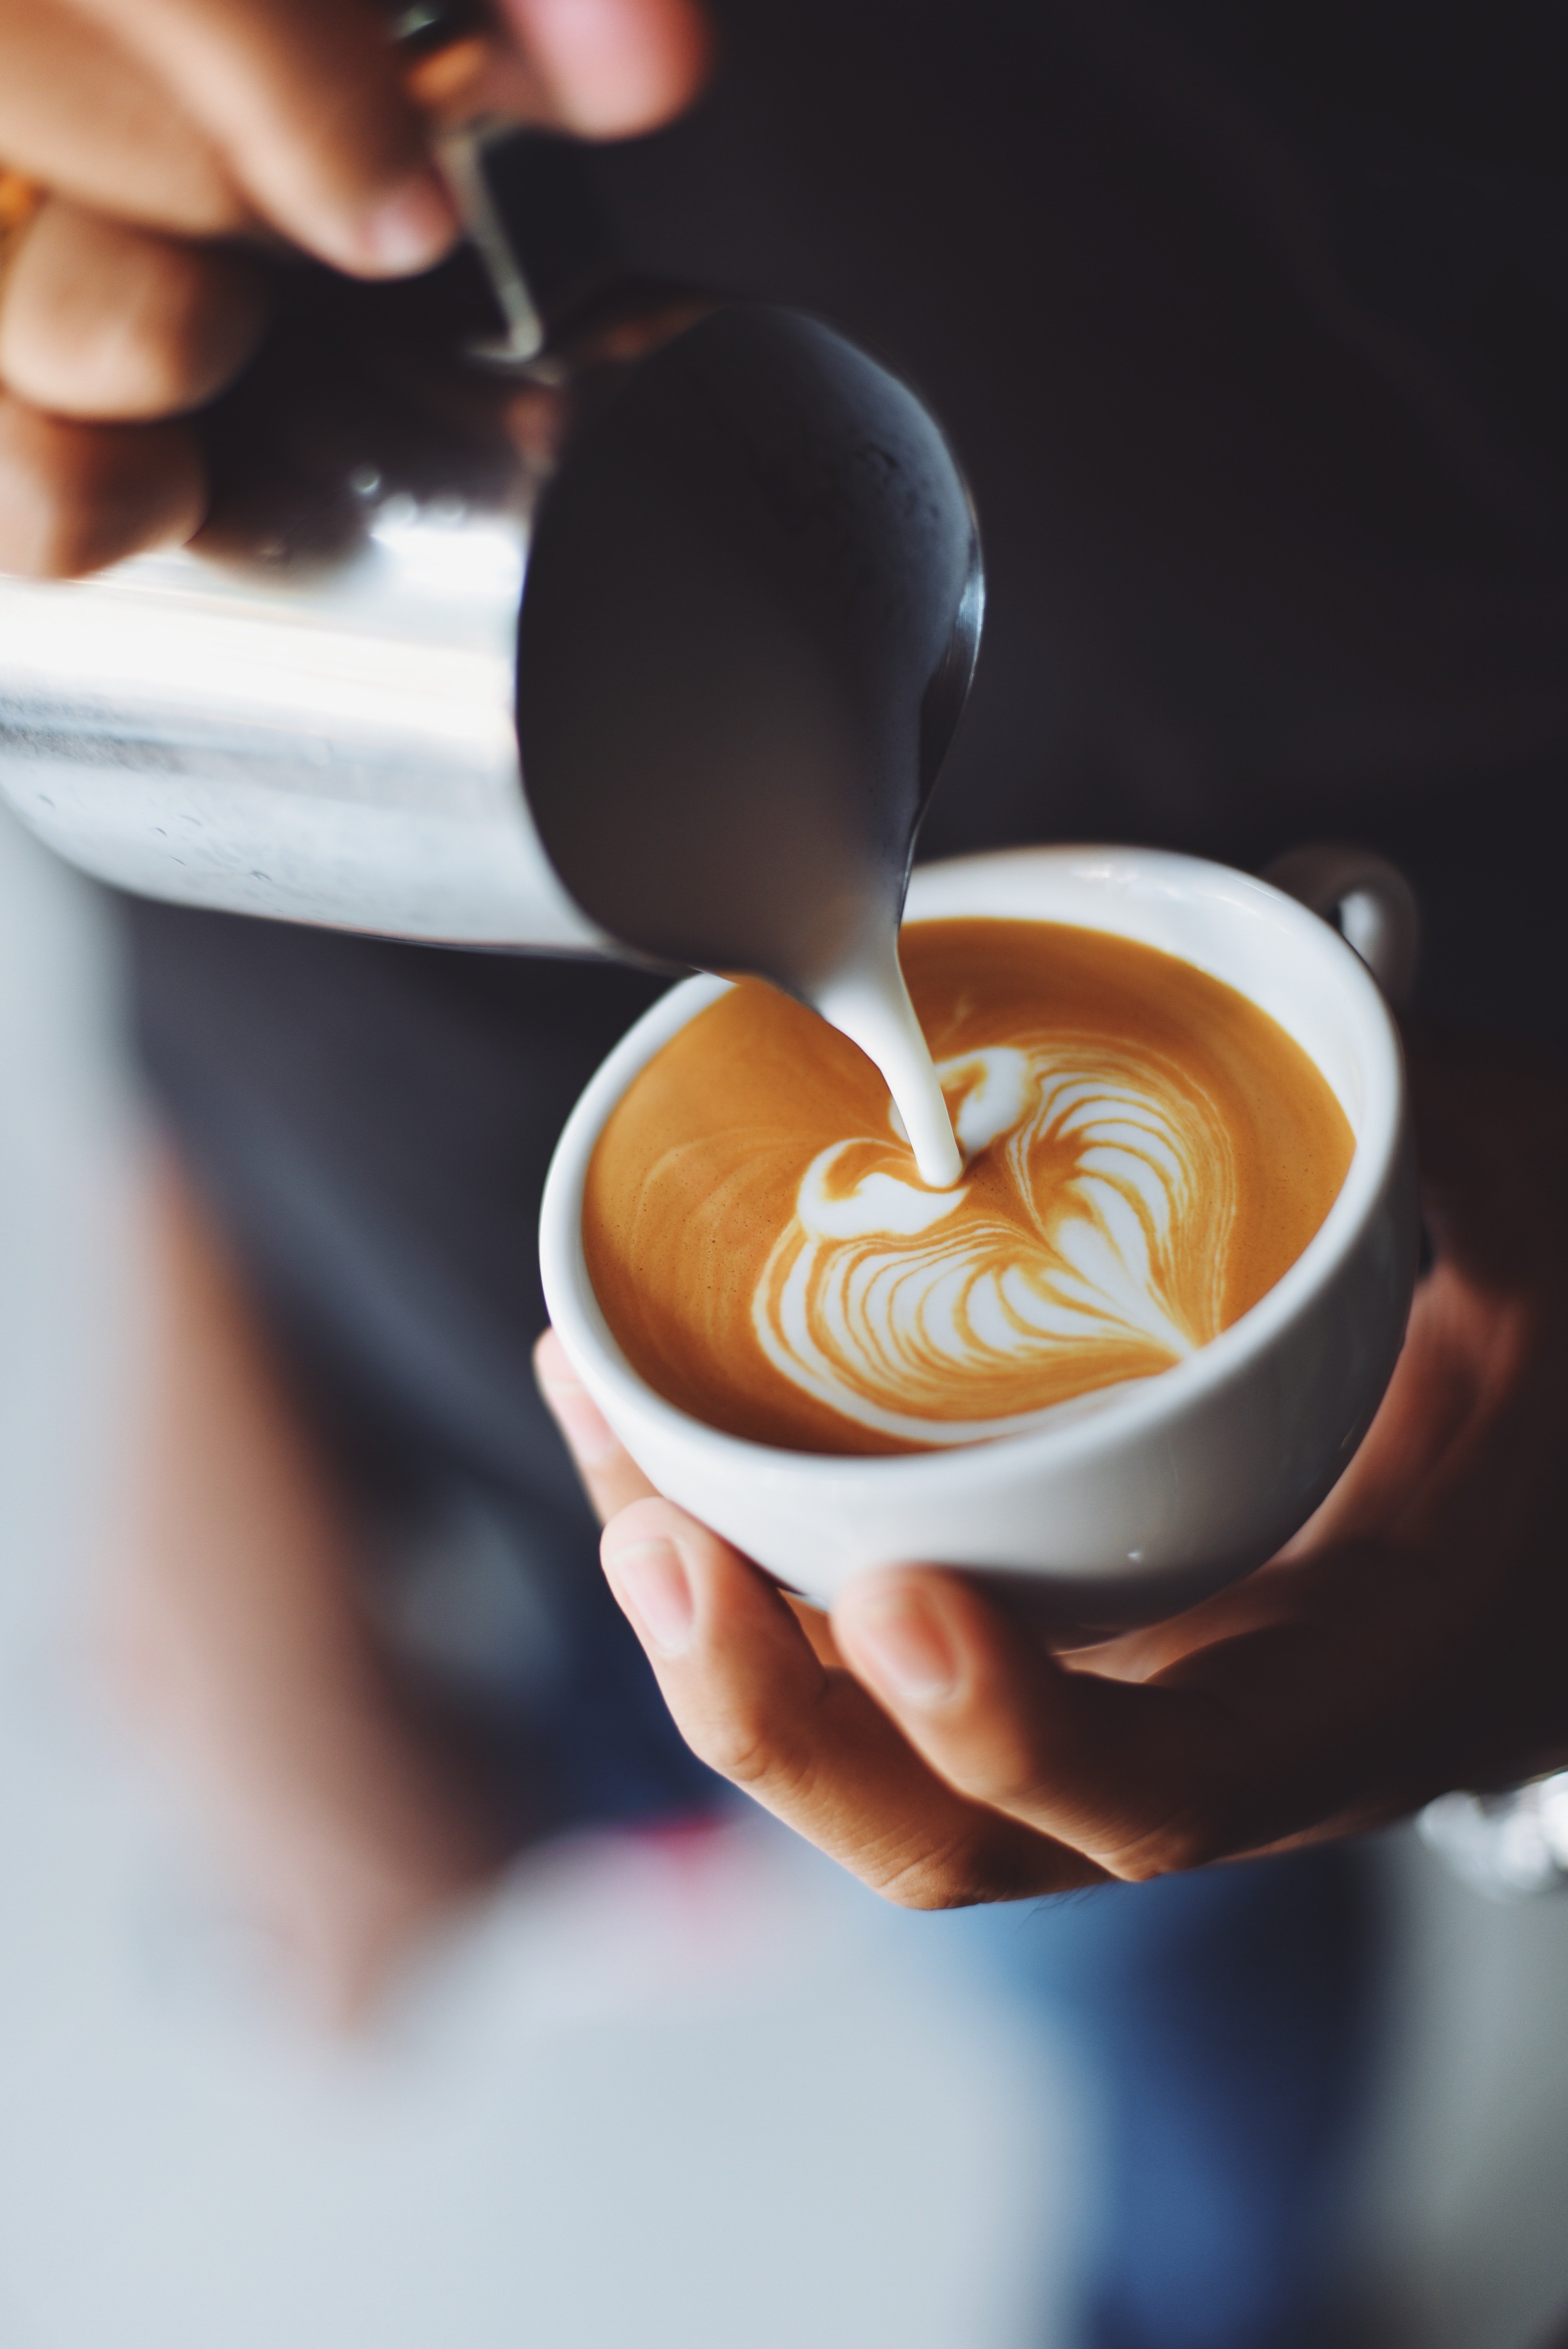 A cup of coffee. | Source: Pexels